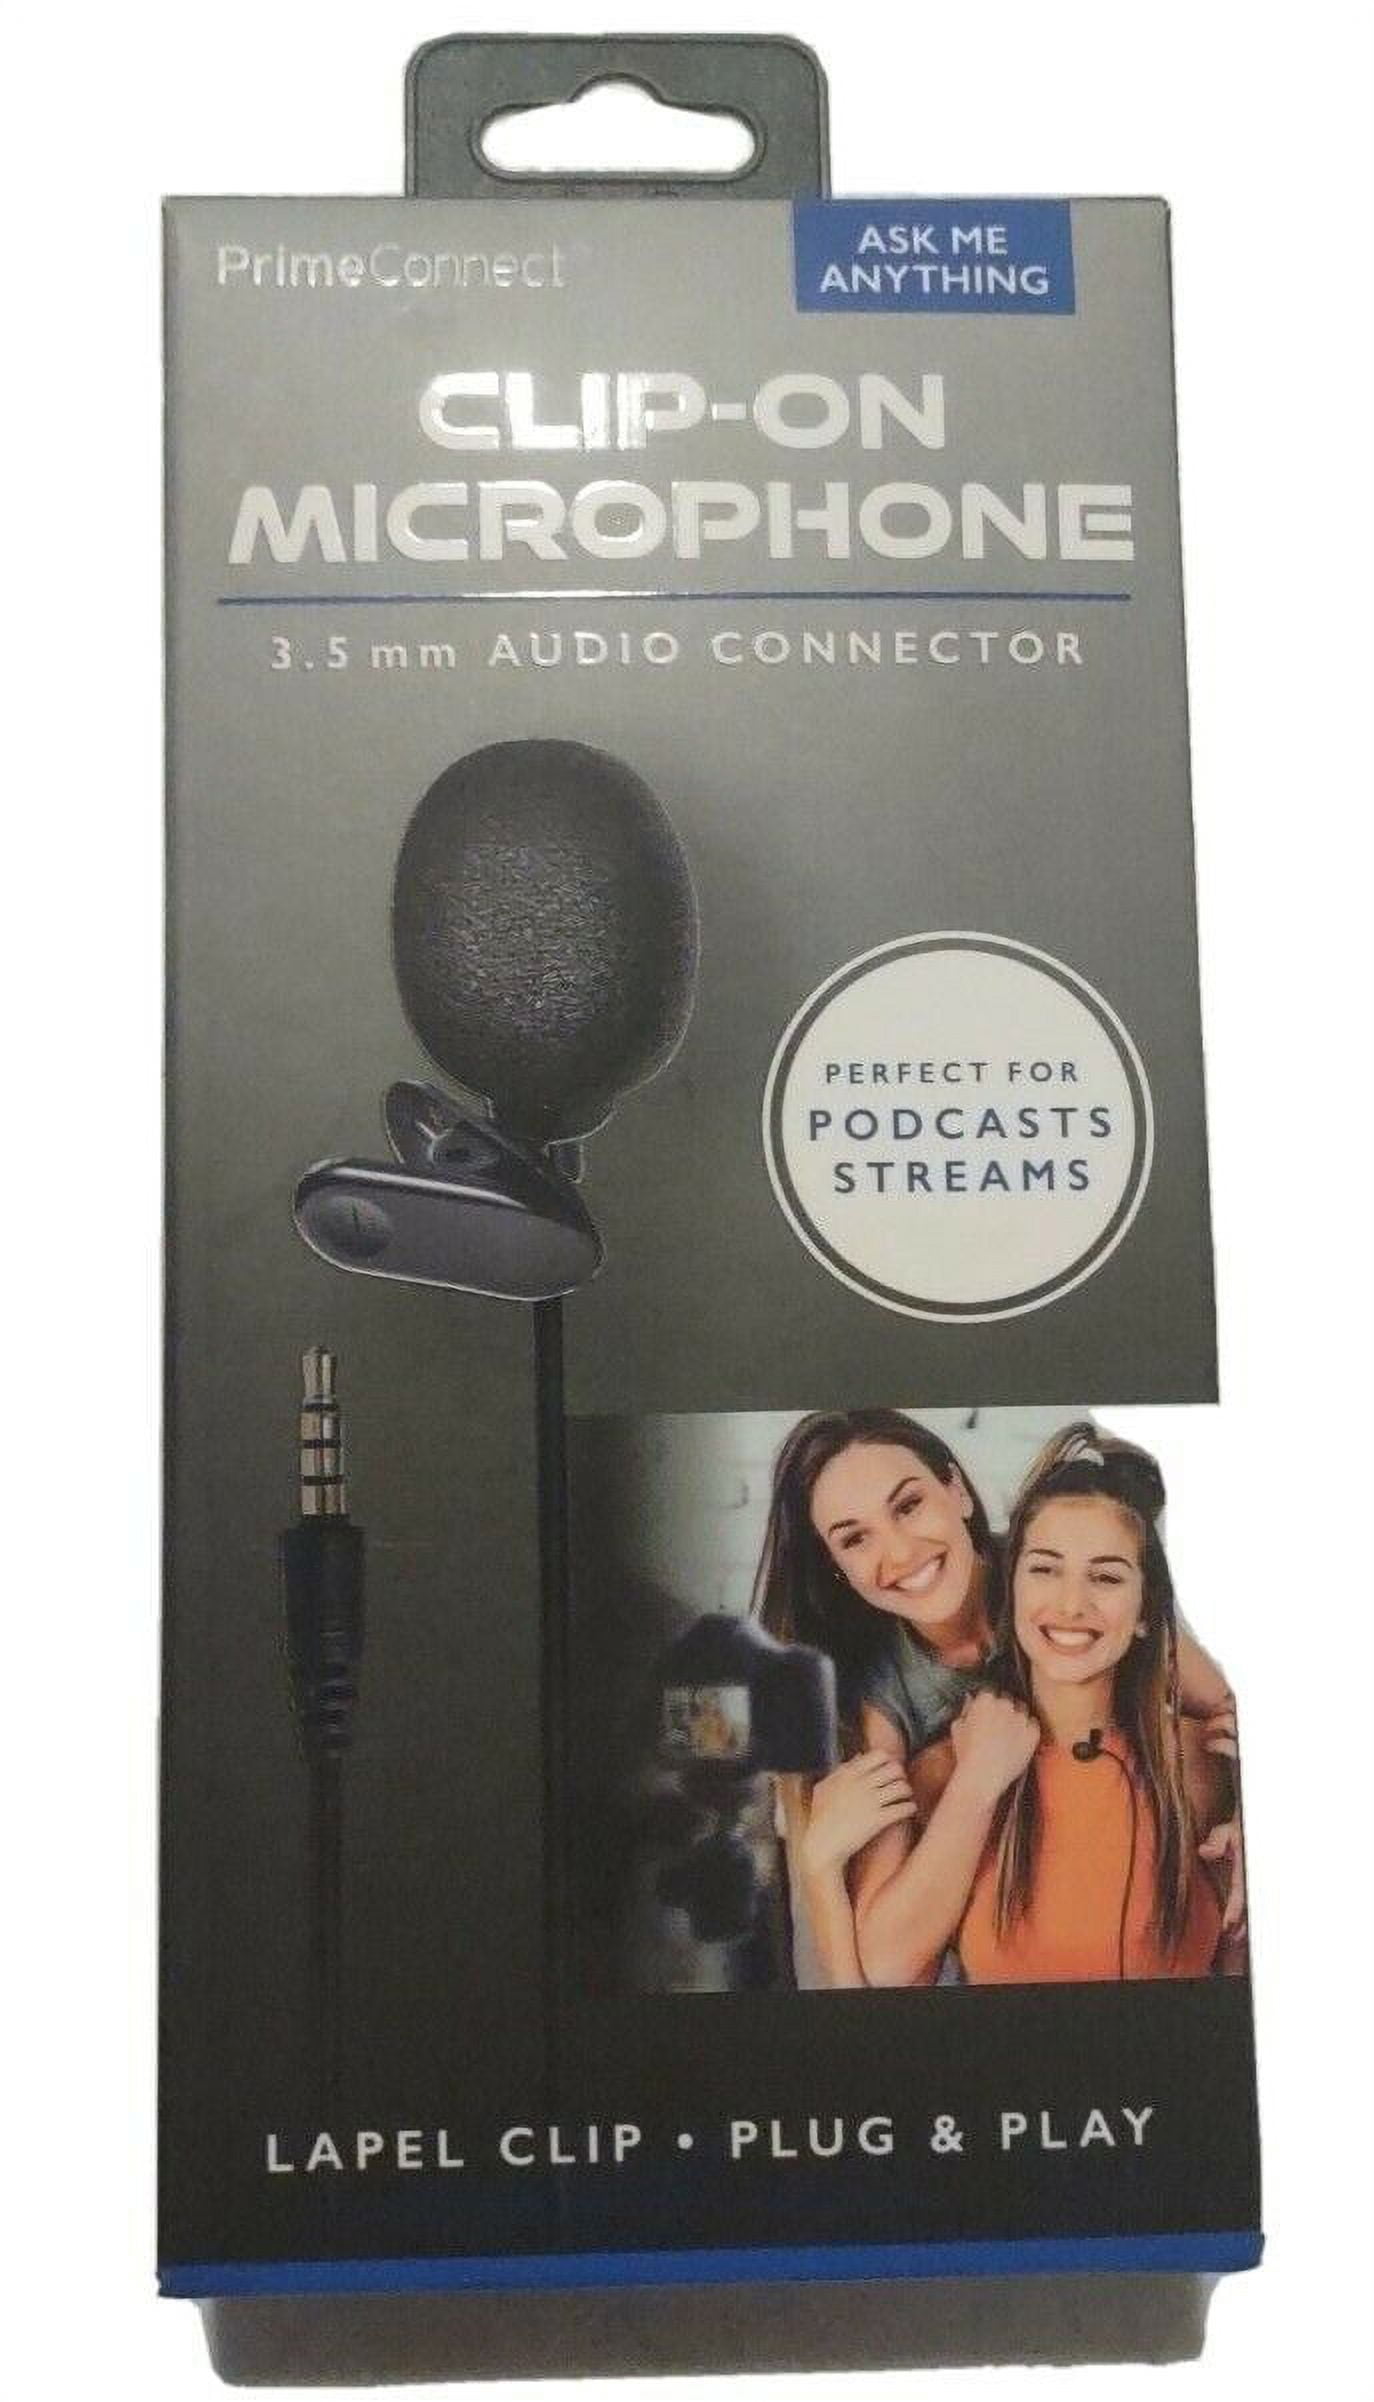 Prime Connect Clip-On Microphone Perfect For Podcasts & Streams Lapel Clip